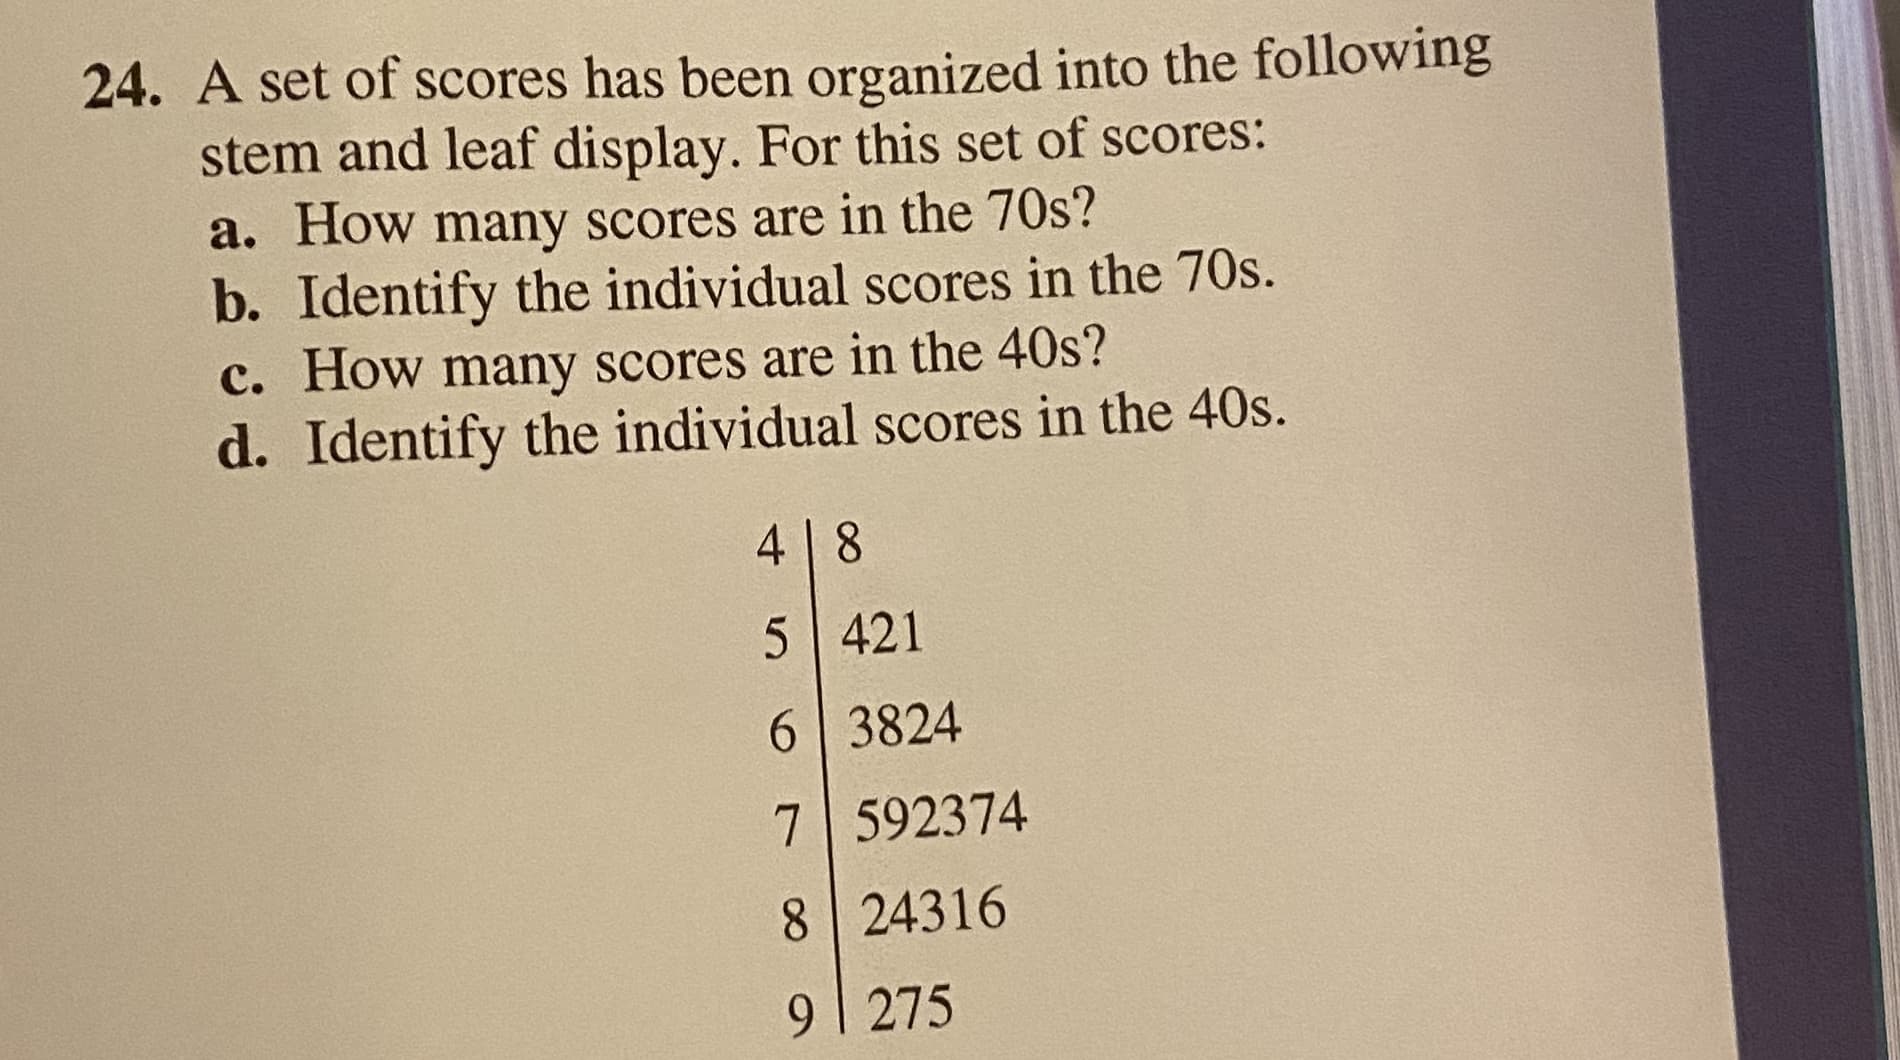 24. A set of scores has been organized into the following
stem and leaf display. For this set of scores:
a. How many scores are in the 70s?
b. Identify the individual scores in the 70s.
c. How many scores are in the 40s?
d. Identify the individual scores in the 40s.
4 8
5 421
6 3824
7 592374
8 24316
9| 275
